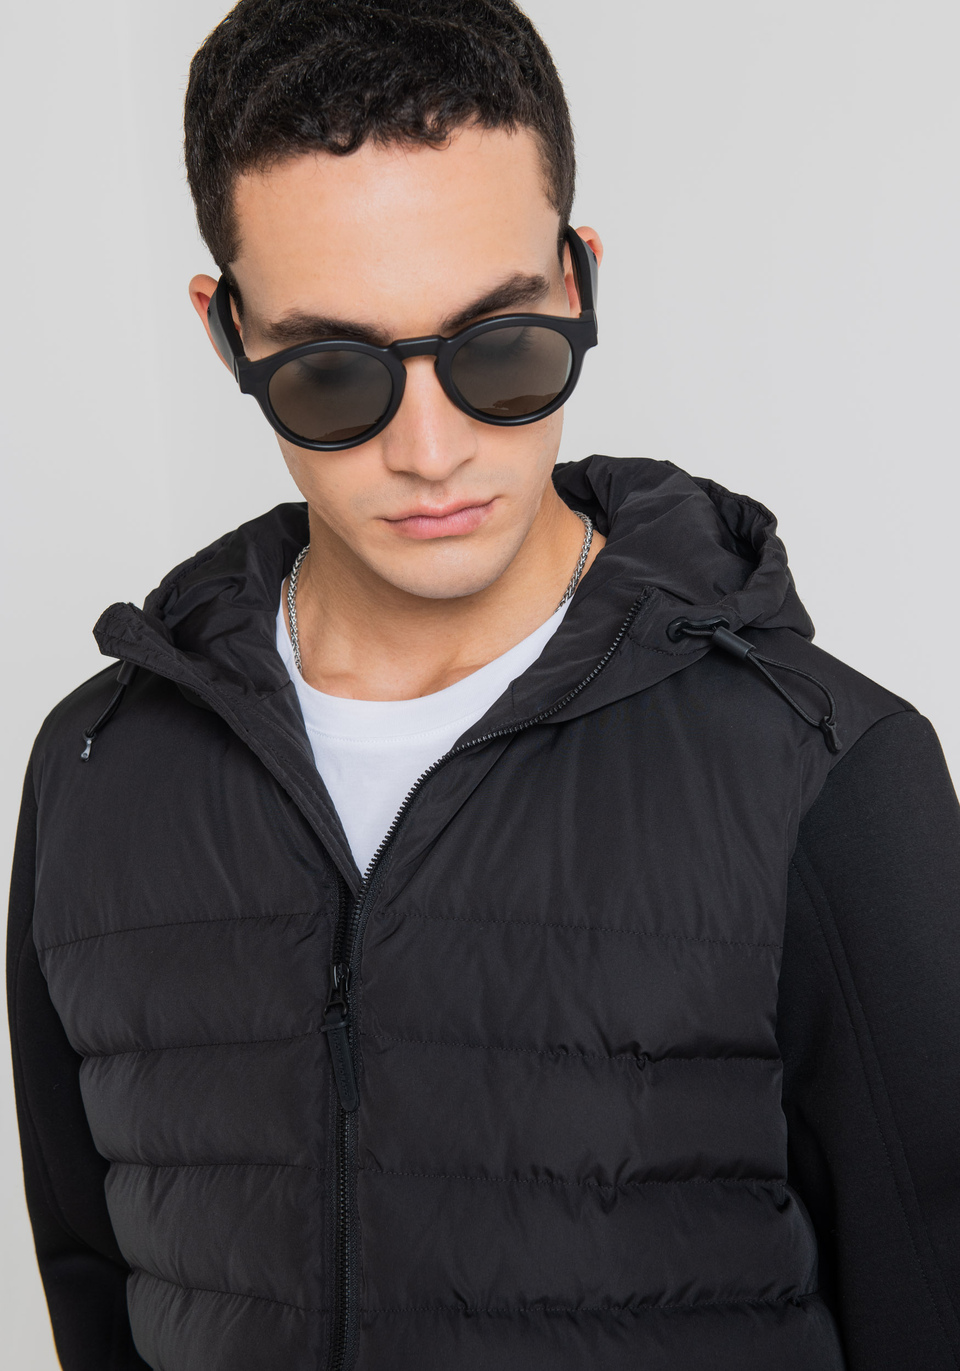 SLIM FIT JACKET IN QUILTED TECHNICAL FABRIC - Antony Morato Online Shop